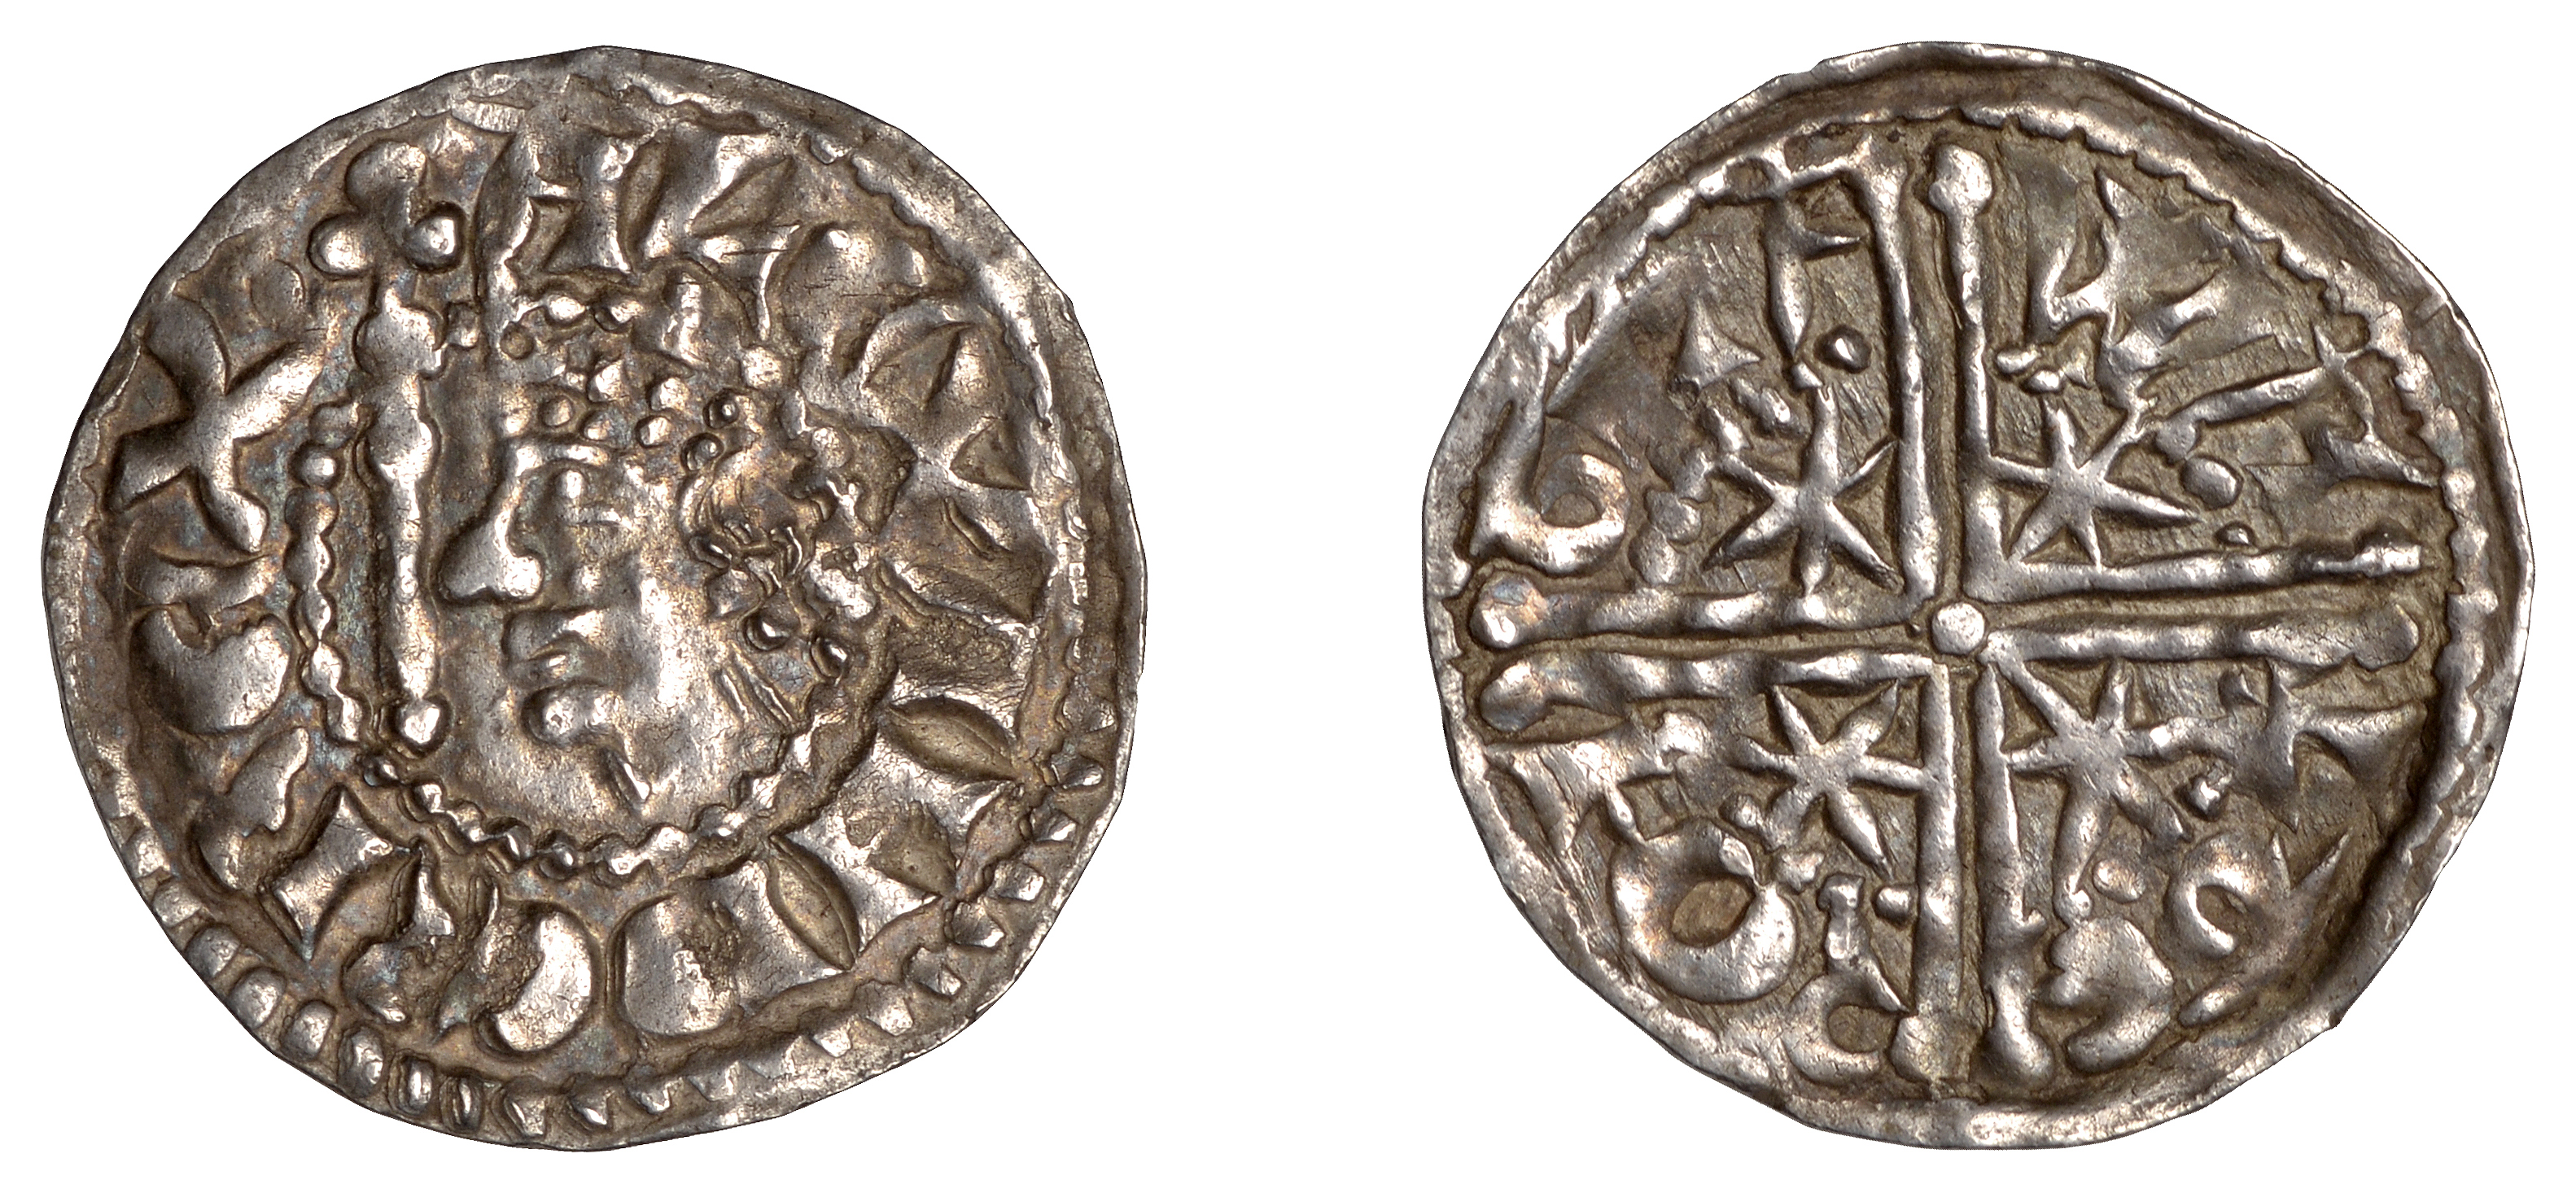 Alexander III (1249-1286), First coinage, Sterling, type IIId, Glasgow, Walter, wal te ron g...